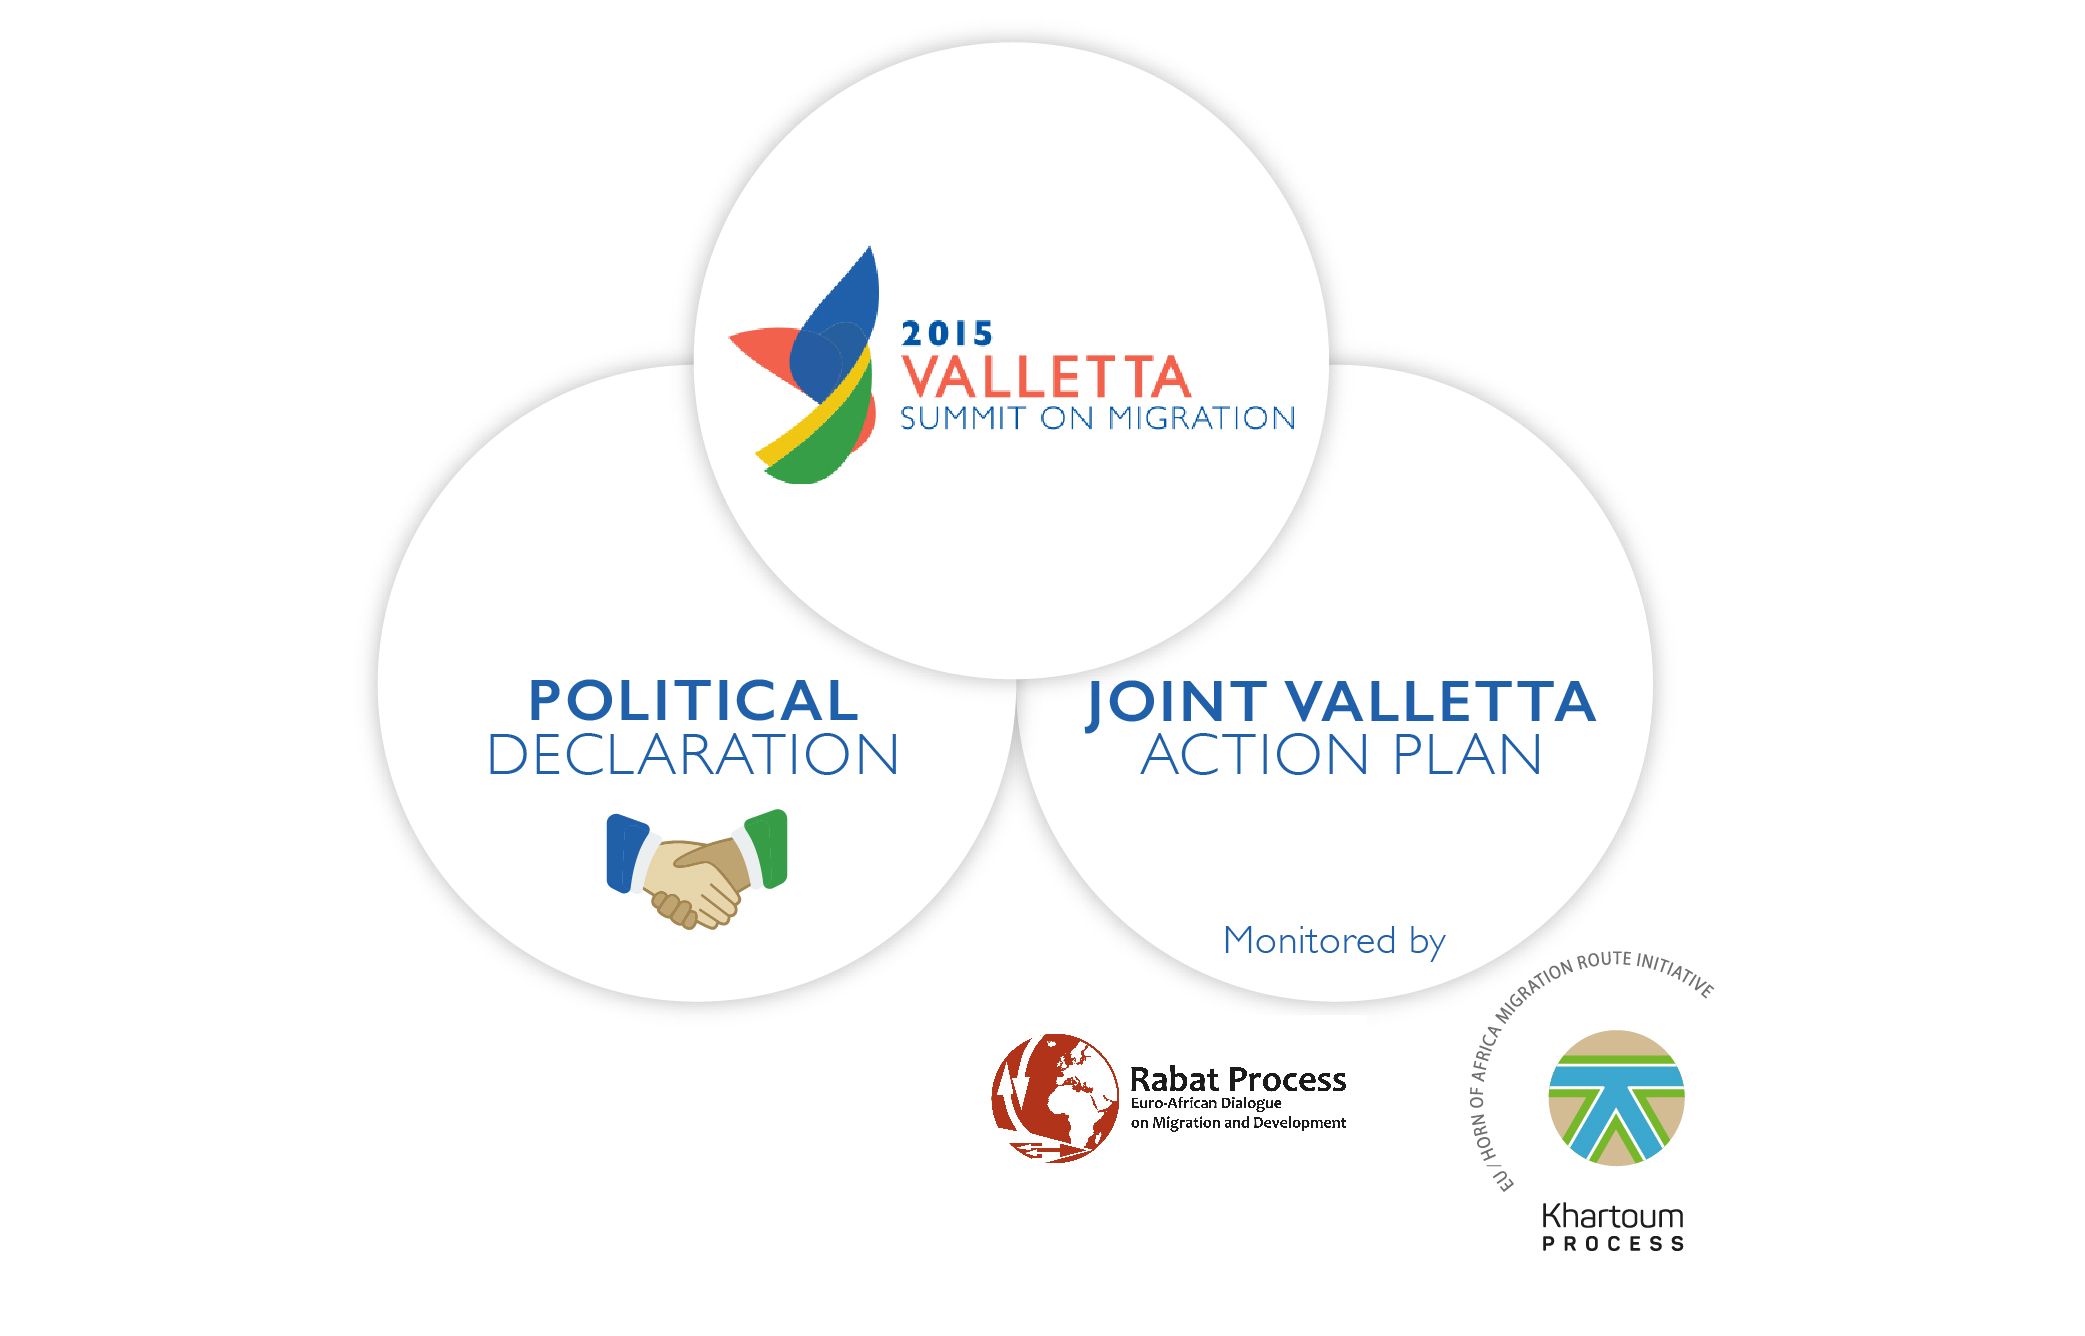 What is the Joint Valletta Action Plan?